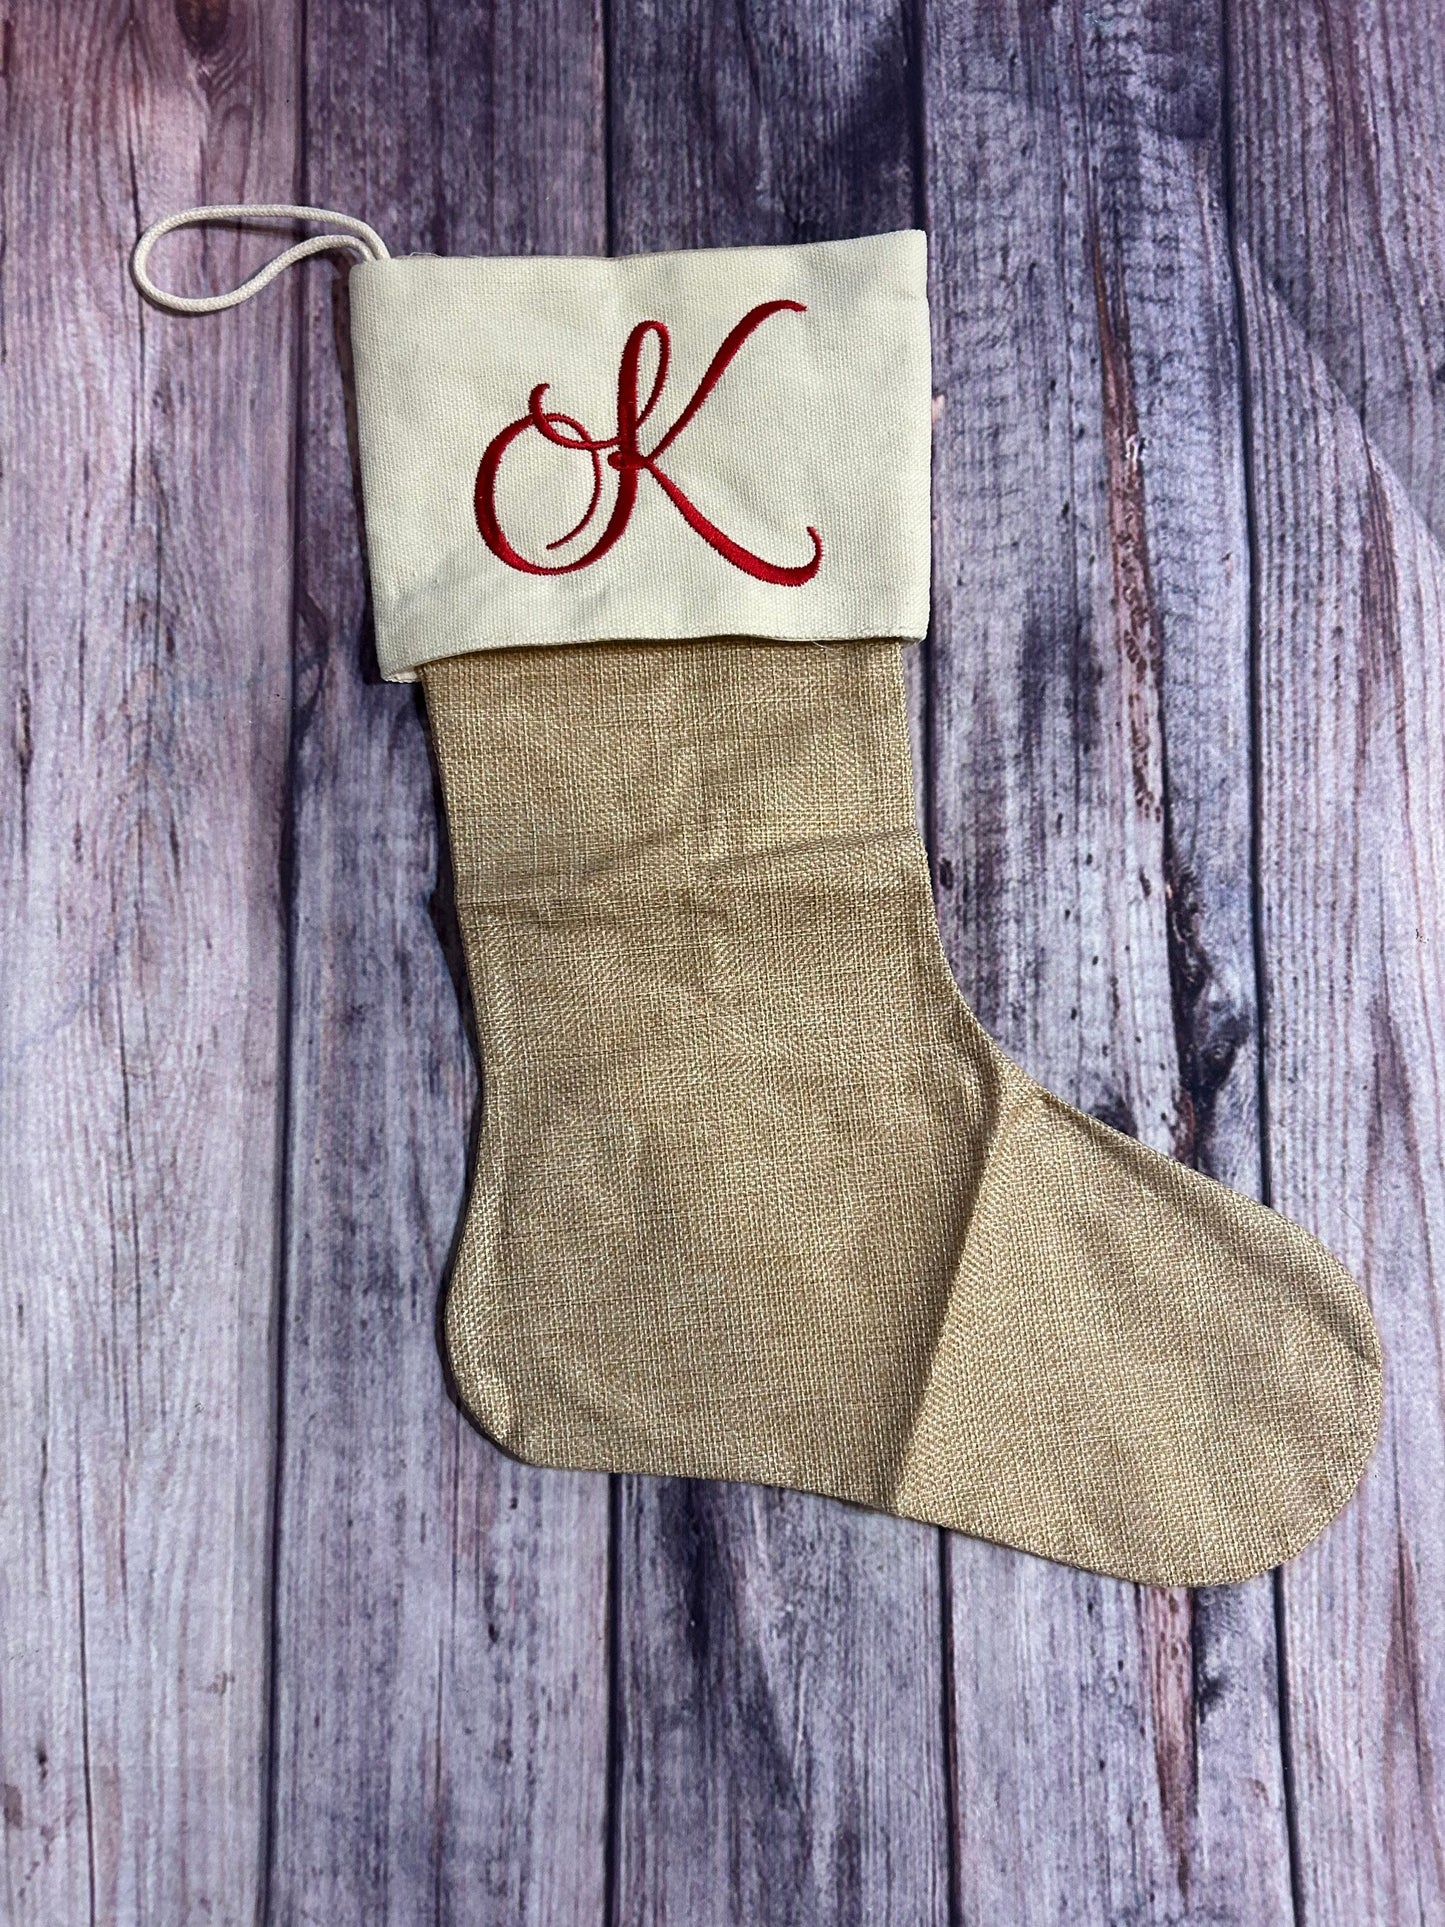 Embroidered Burlap Christmas Stockings with Cream Cuff